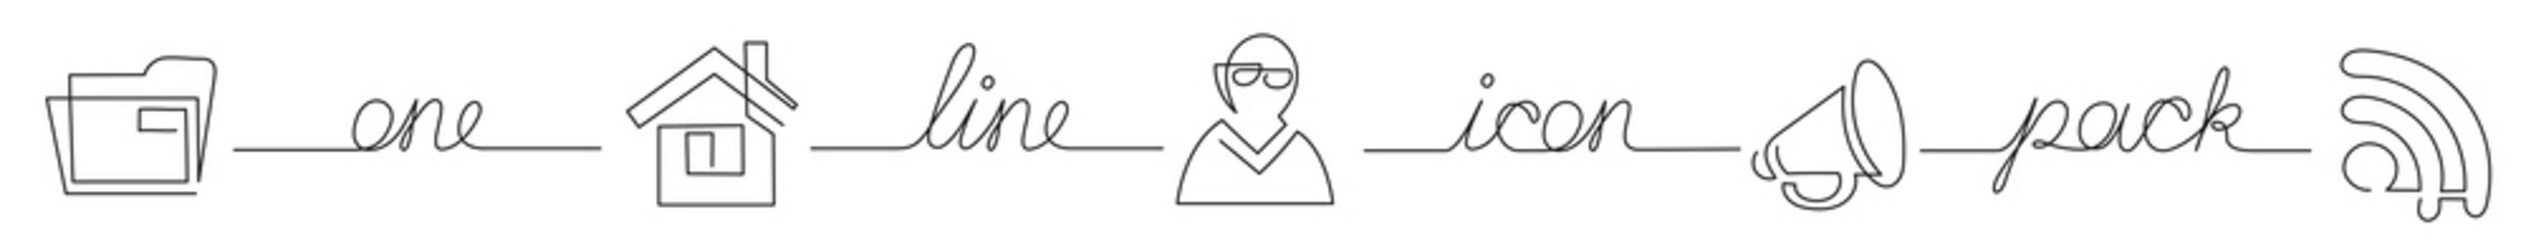 one line icon pack of folder person call - PNG image with transparent background